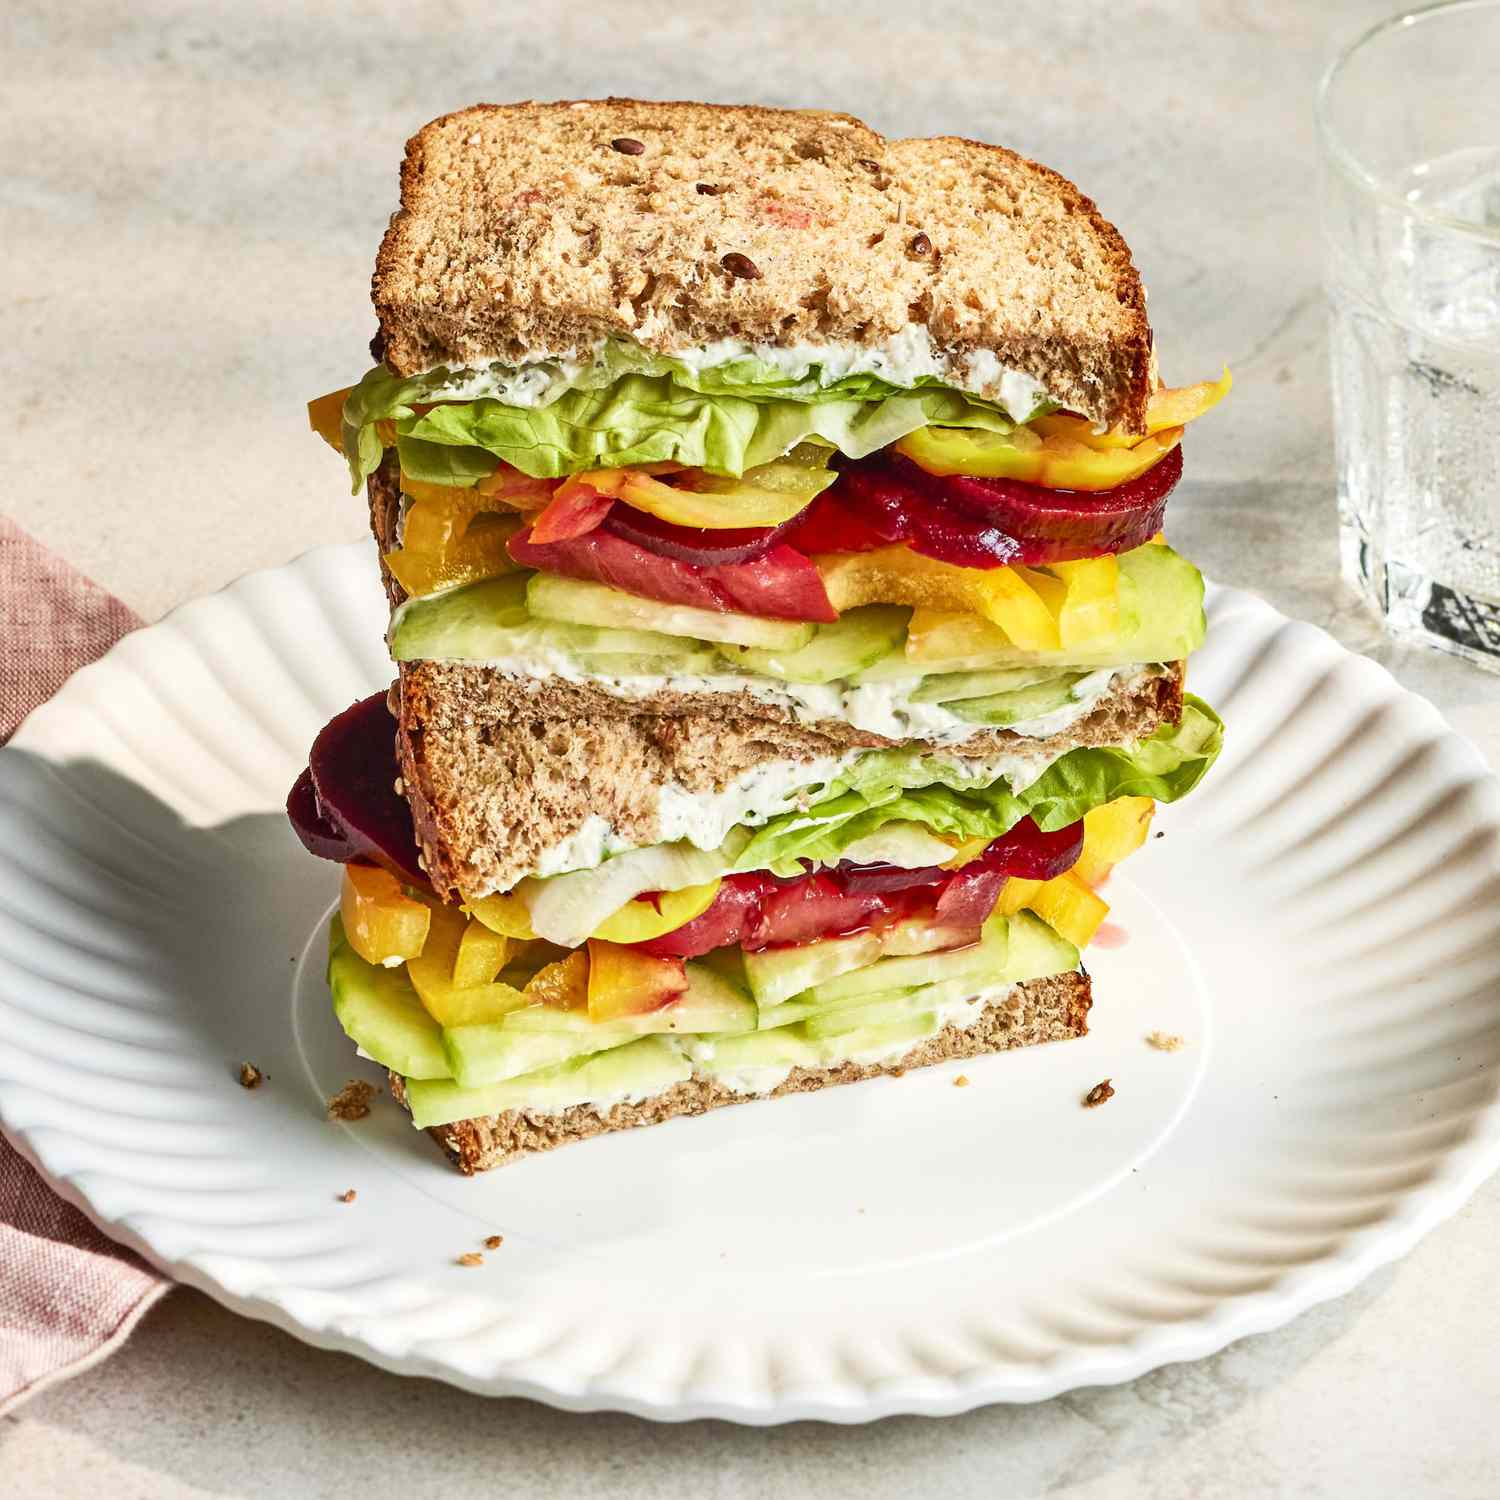 15 Easy Lunch Ideas in 15 Minutes